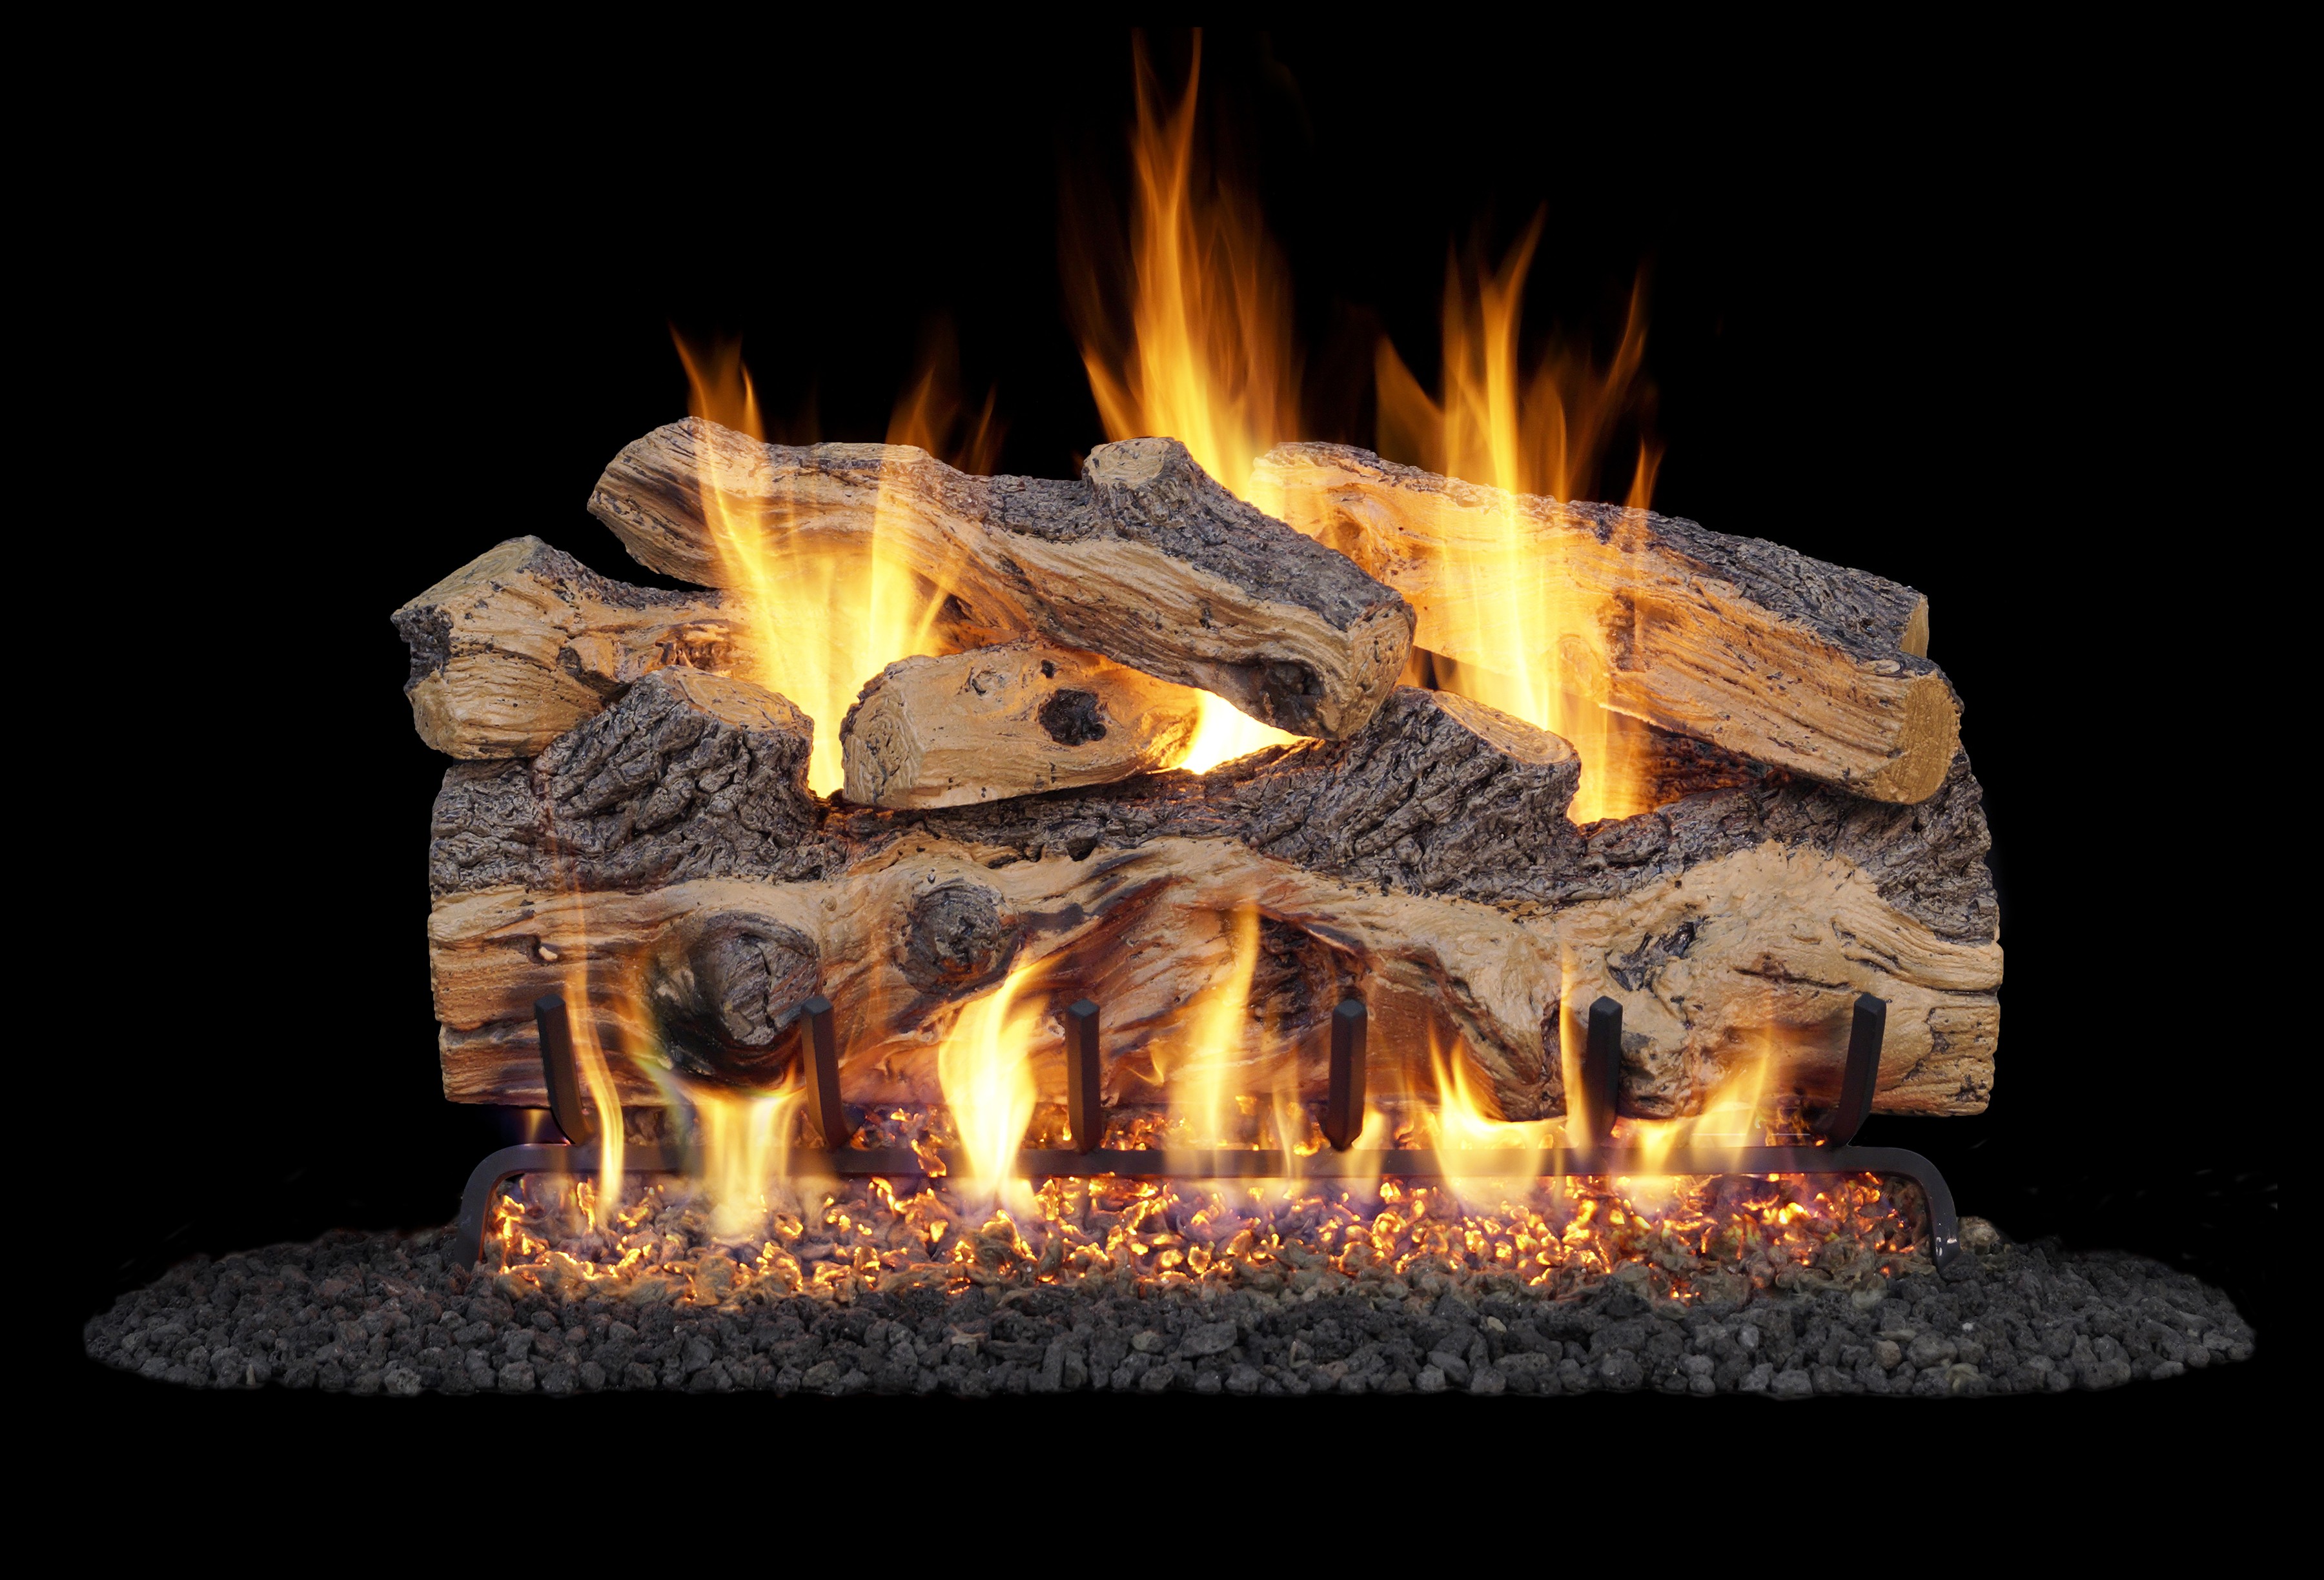 H 310mm HOME LOGS TIDY FIREPLACE QUALITY NEW Blyss Excellence Felt Fire basket 